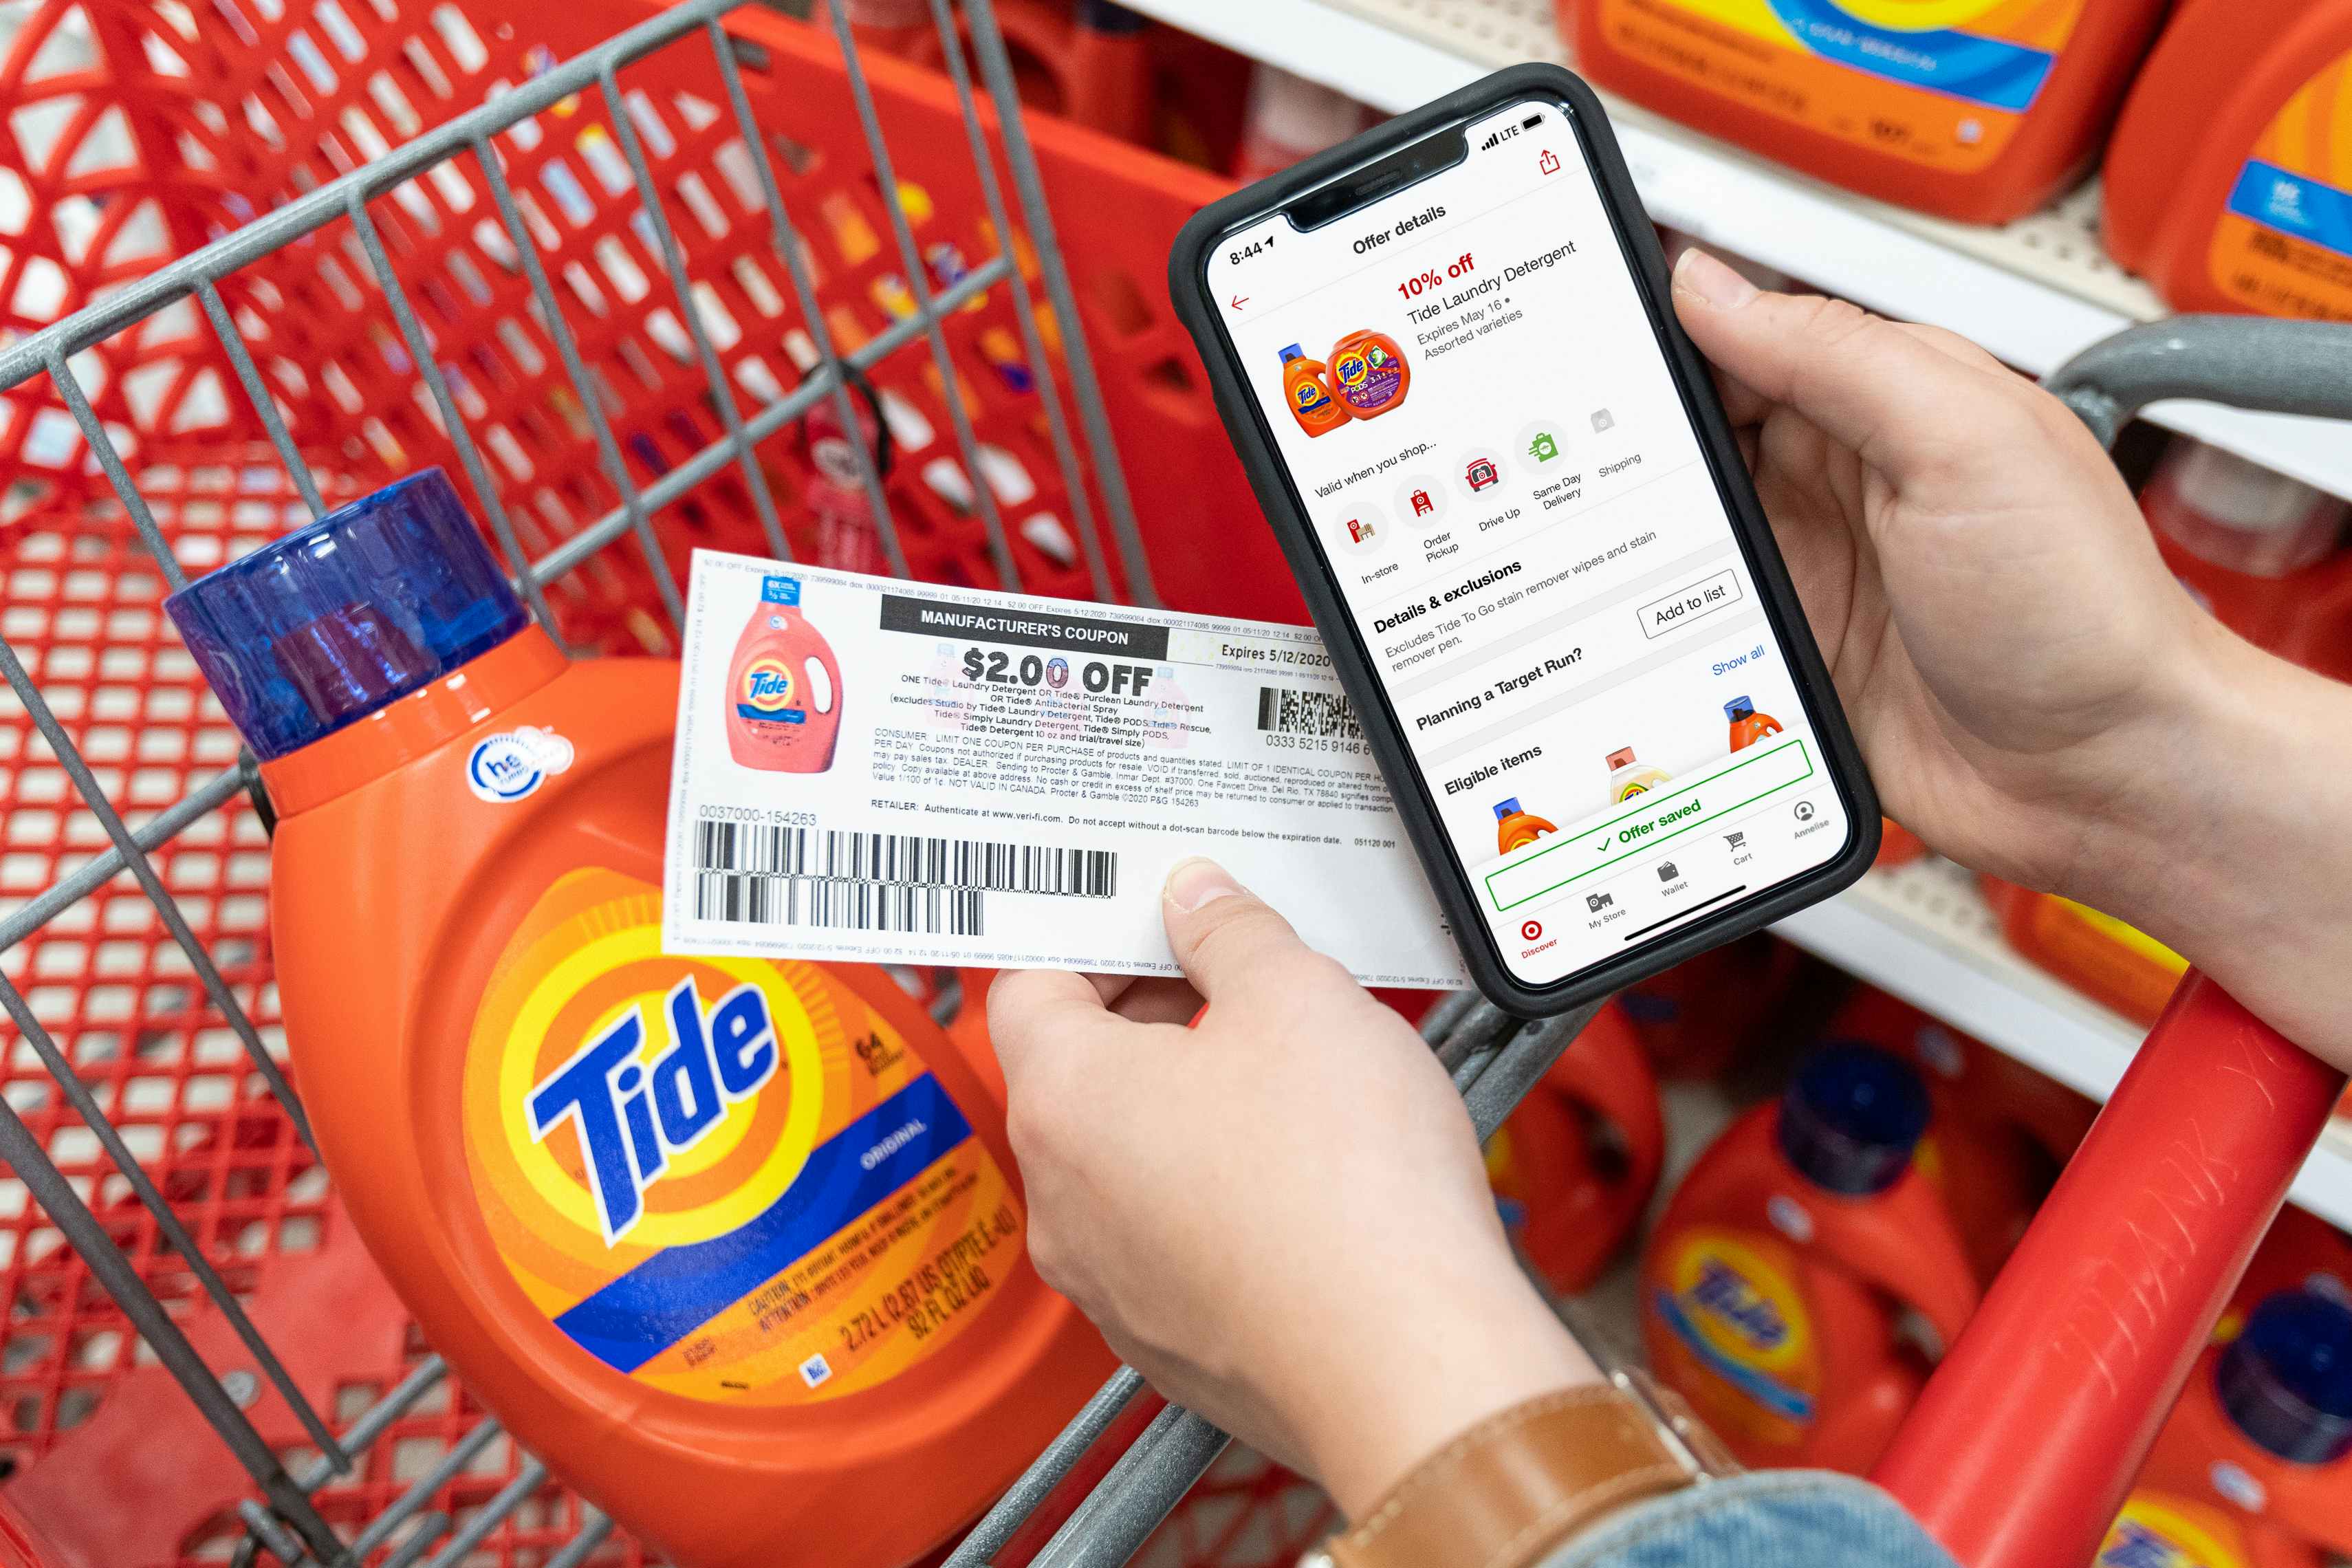 A 10% off Tide laundry detergent on the target circle app, held next to a $2 off manufacture coupon, and a bottle of Tide liquid detergent.